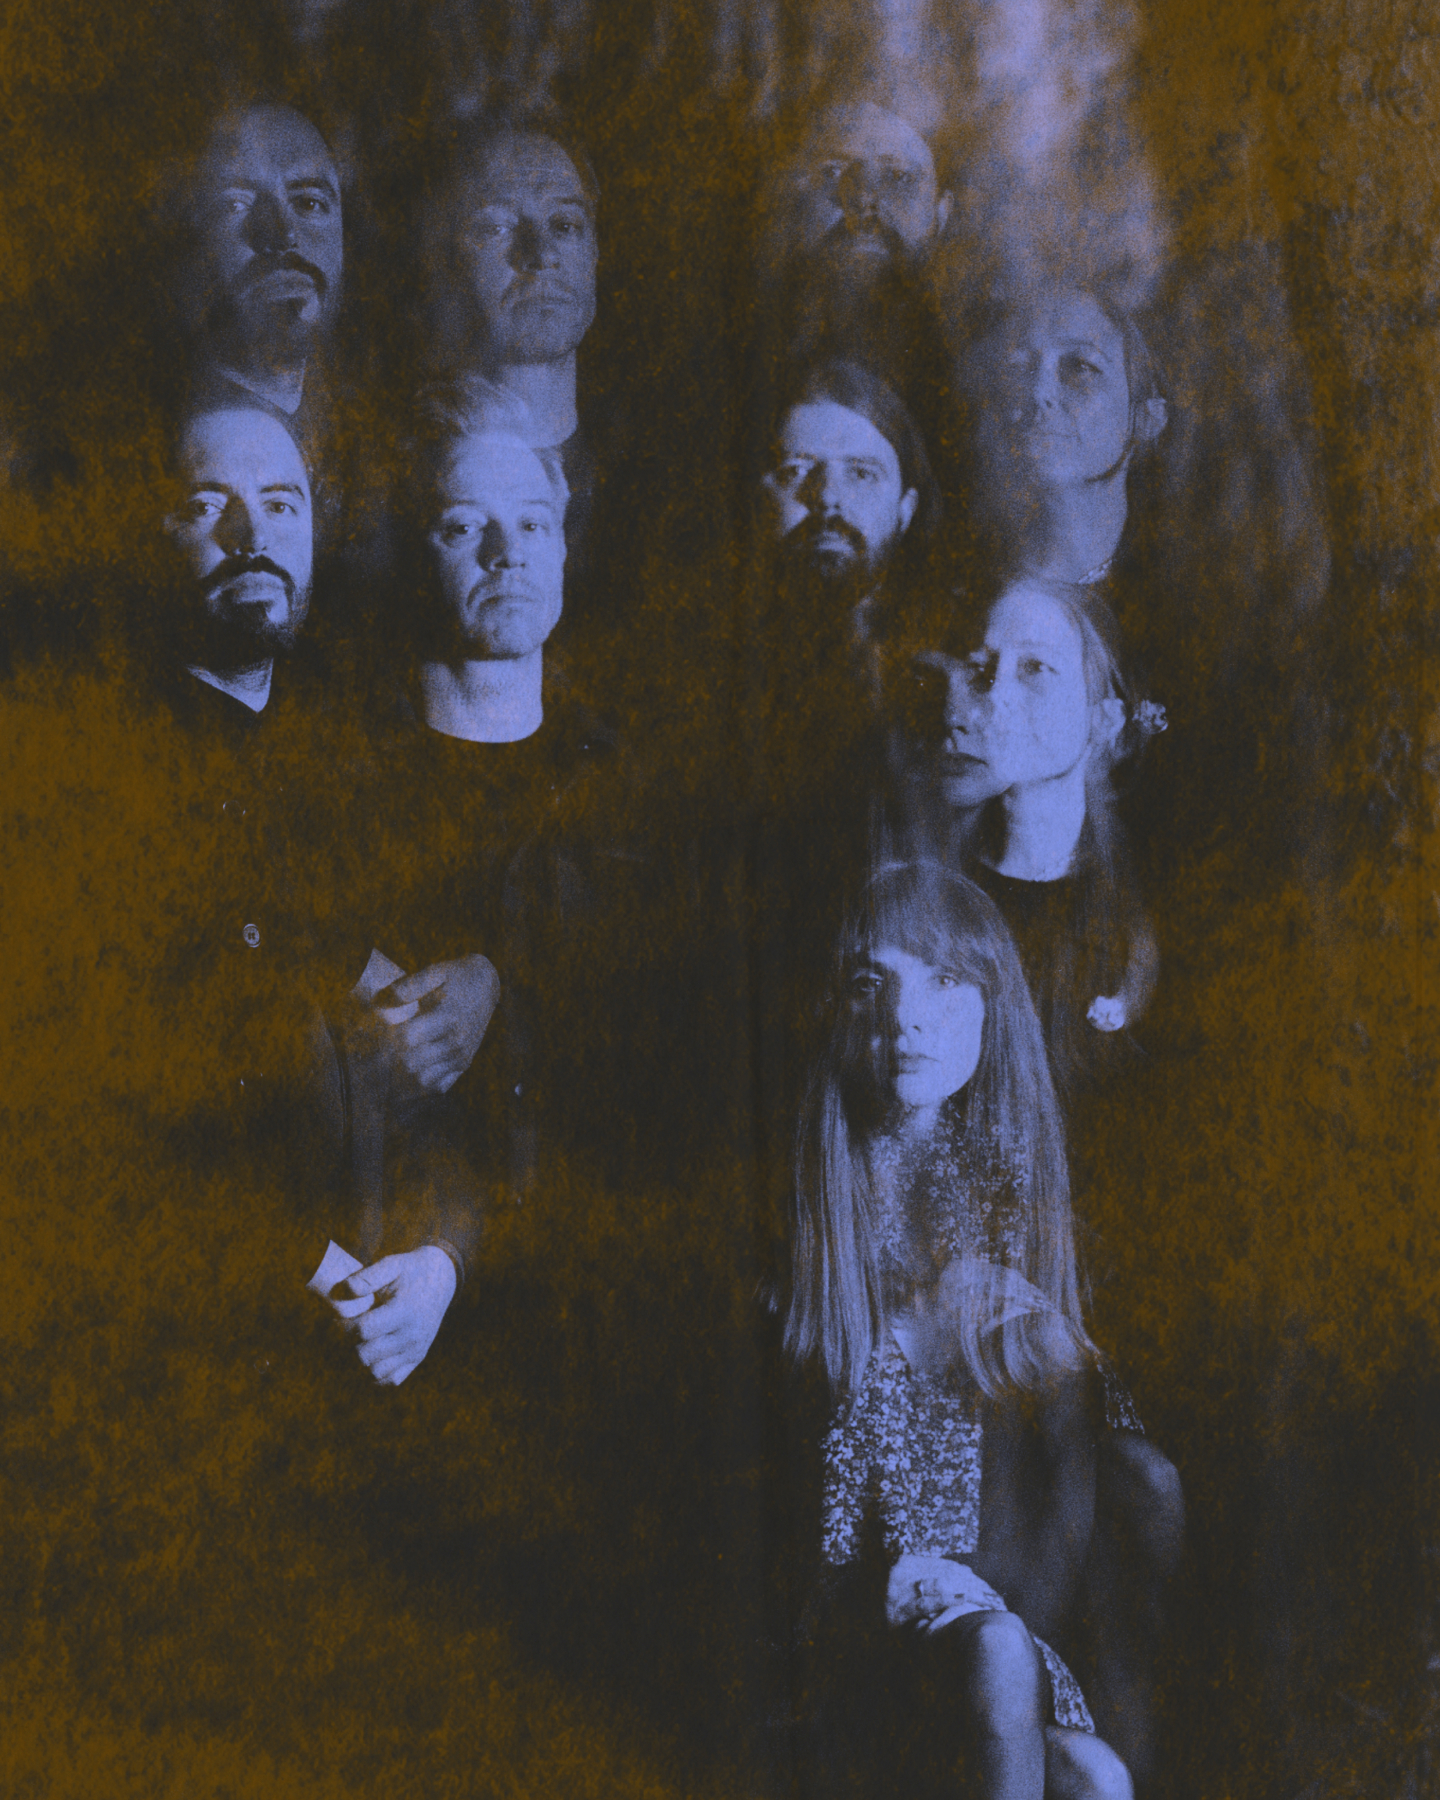 Multiple exposure image of the band New Pagans.